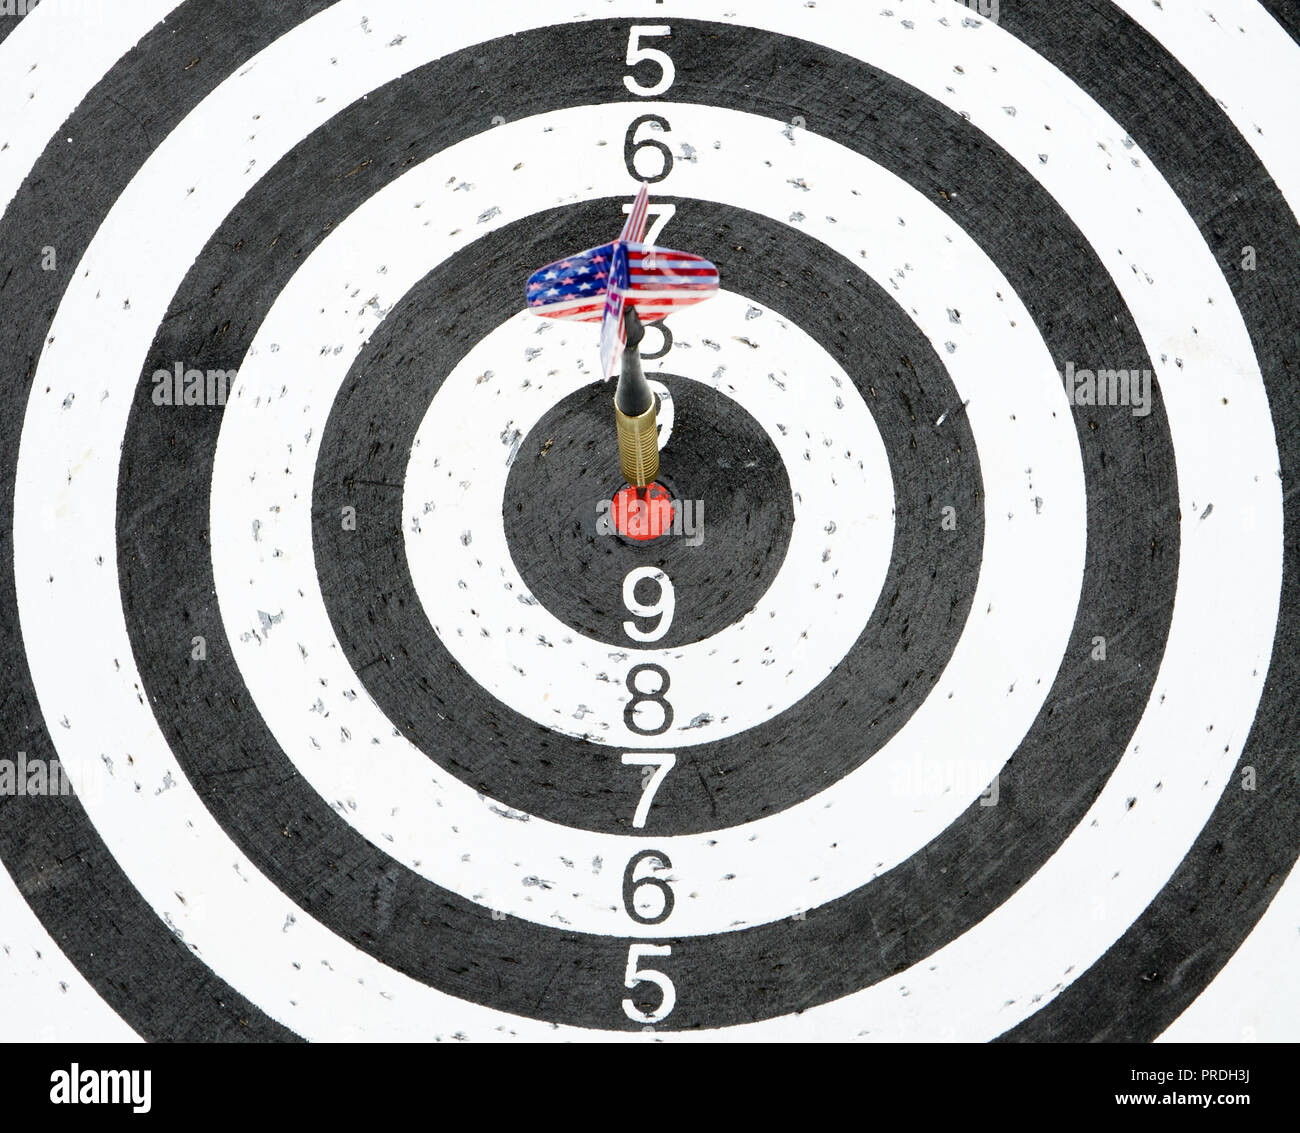 A dart with USA flag on the fletching in the center circle of a target Stock Photo